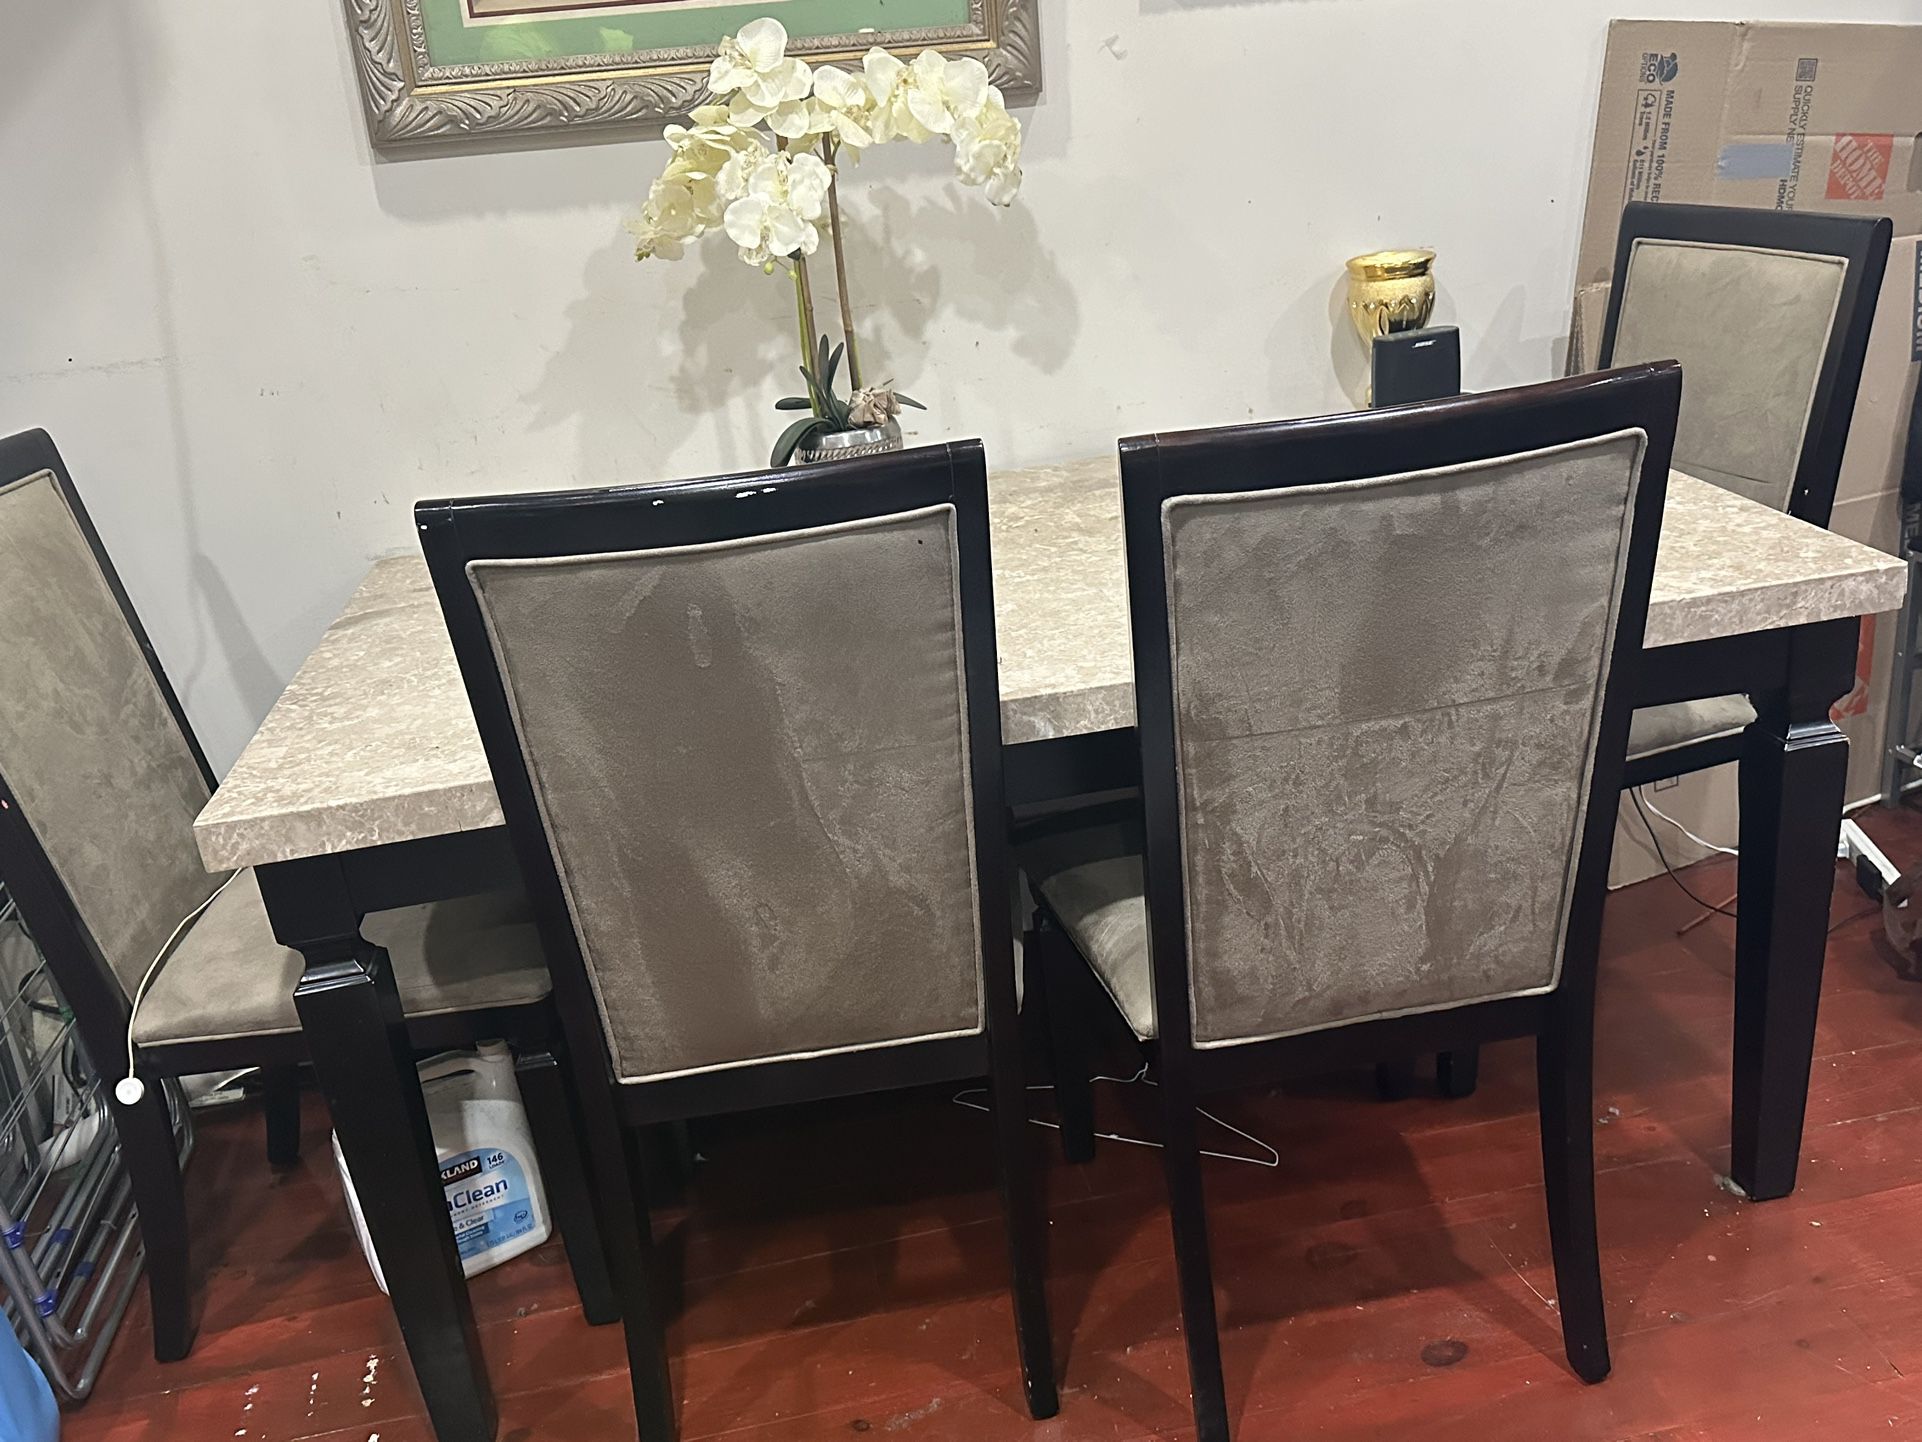 Table With Marble Top And 4 Chairs $400